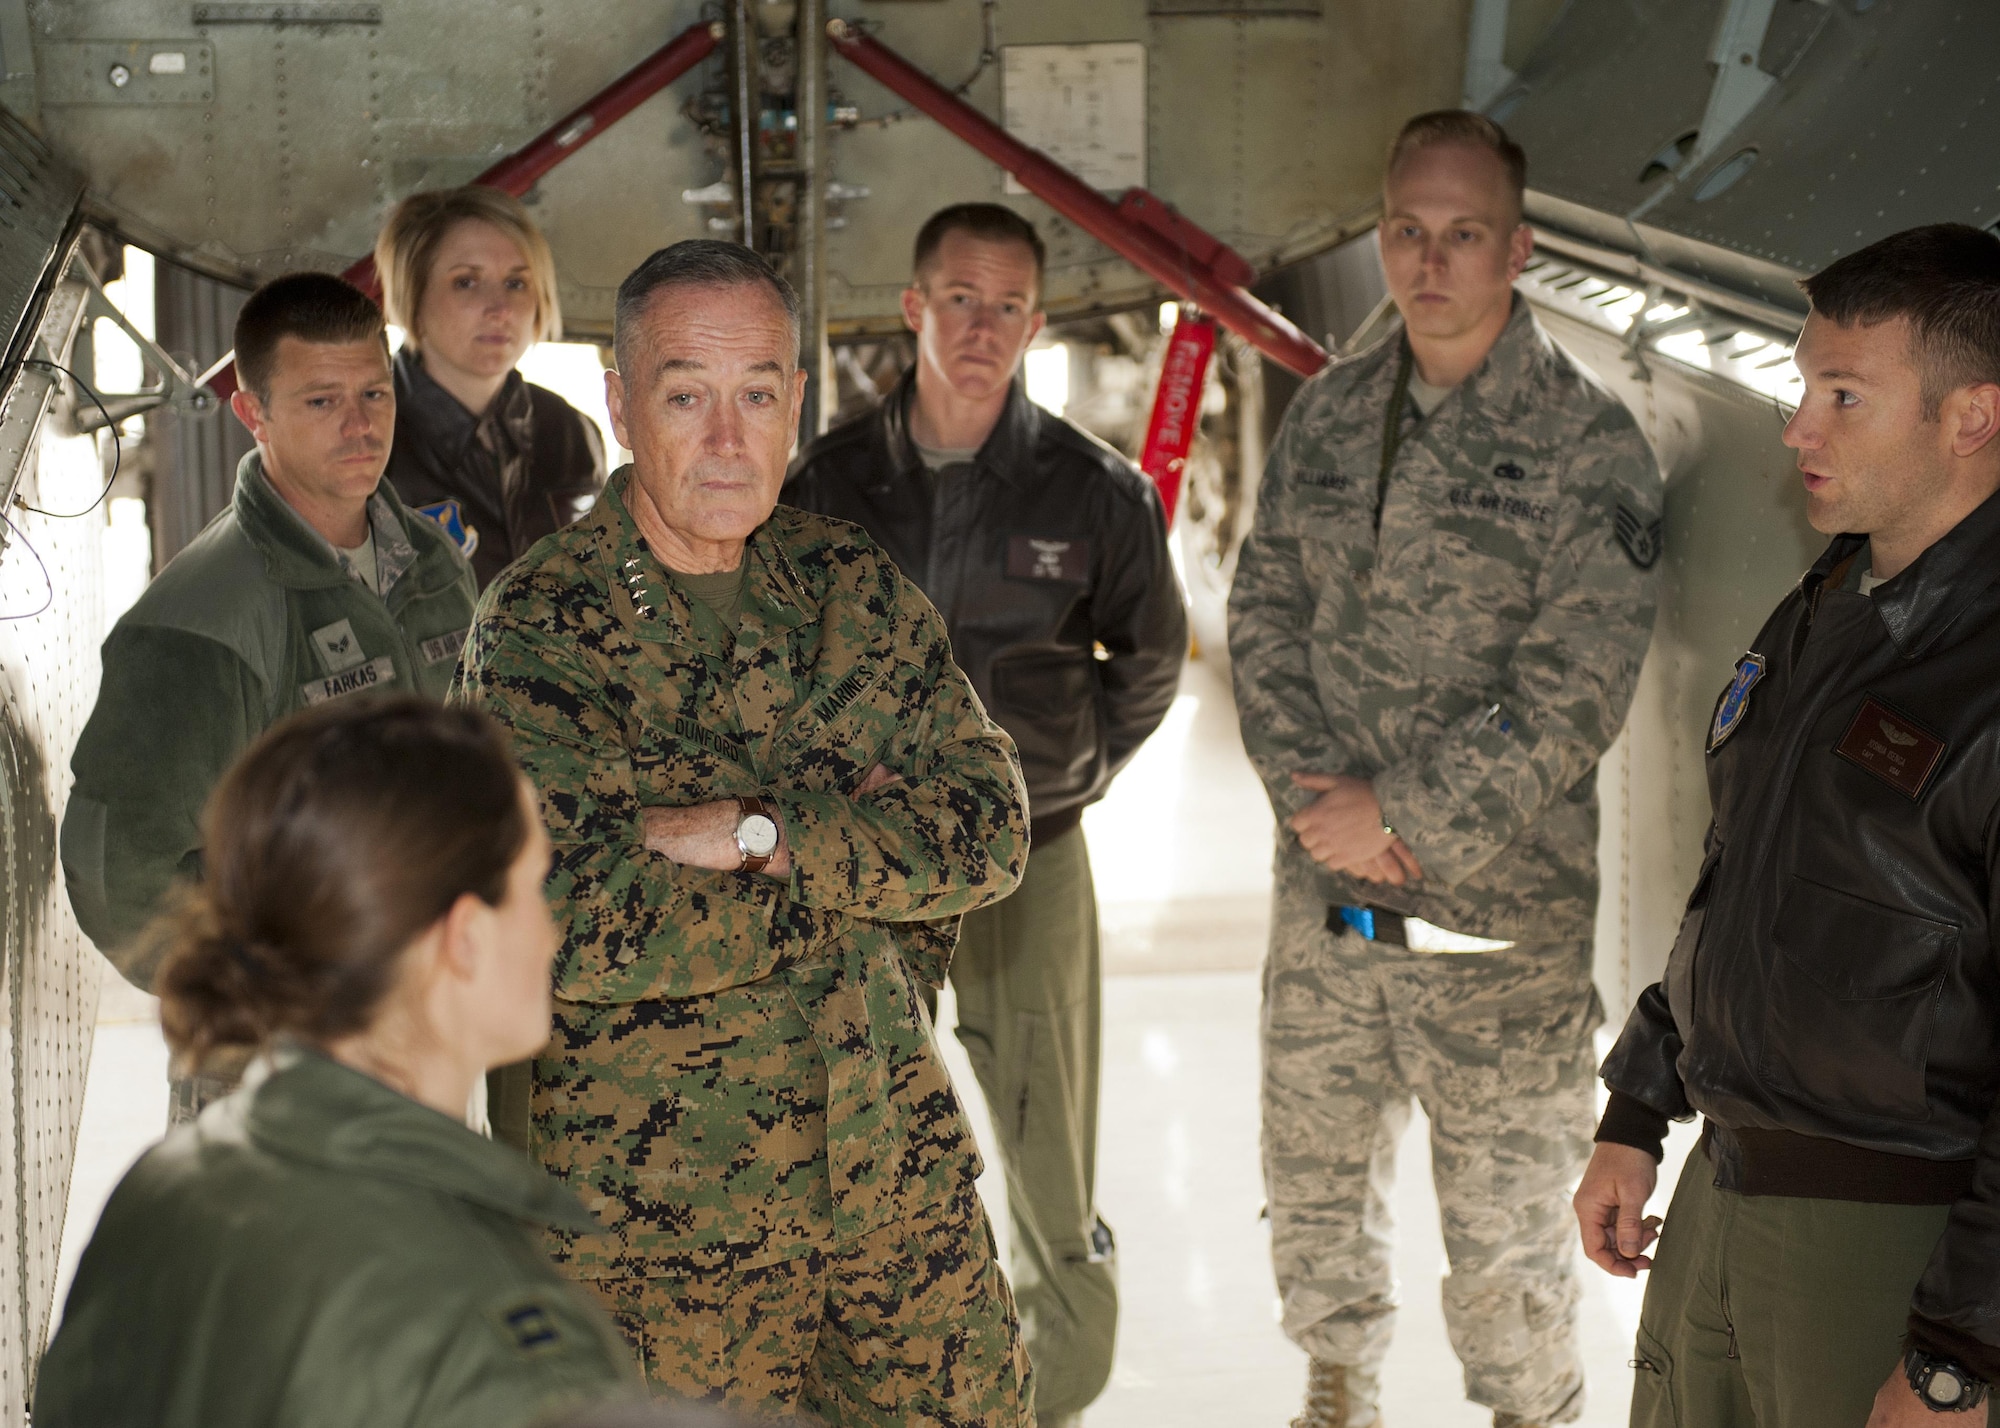 U.S. Marine Corps Gen. Joseph Dunford, chairman of the Joint Chiefs of Staff, listens to Team Minot members at Minot Air Force Base, N.D., Nov. 2, 2016. During Dunford’s tour, he was briefed by Airmen about the B-52H Stratofortress’ weapons capabilities. (U.S. Air Force photo/Airman 1st Class J.T. Armstrong)